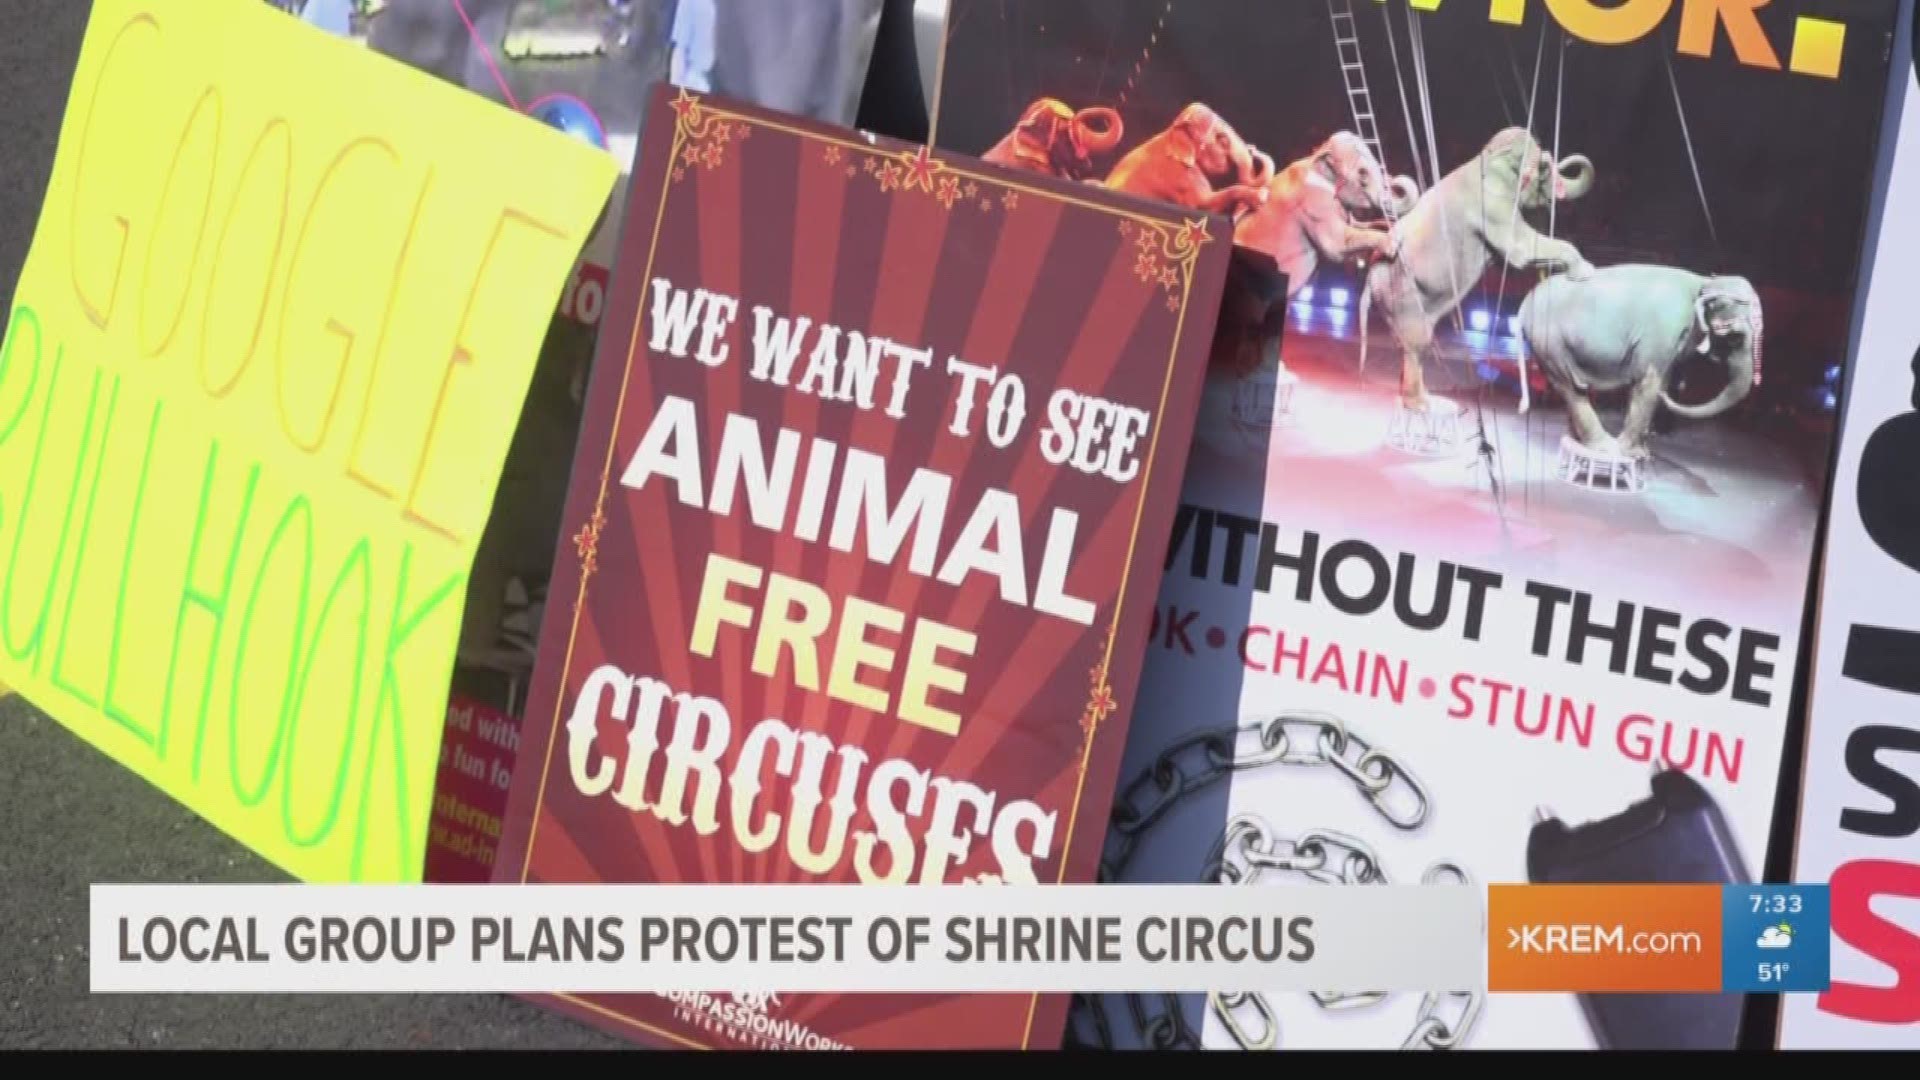 Shrine Circus coming to town, not everyone is happy about it (4-27-18)